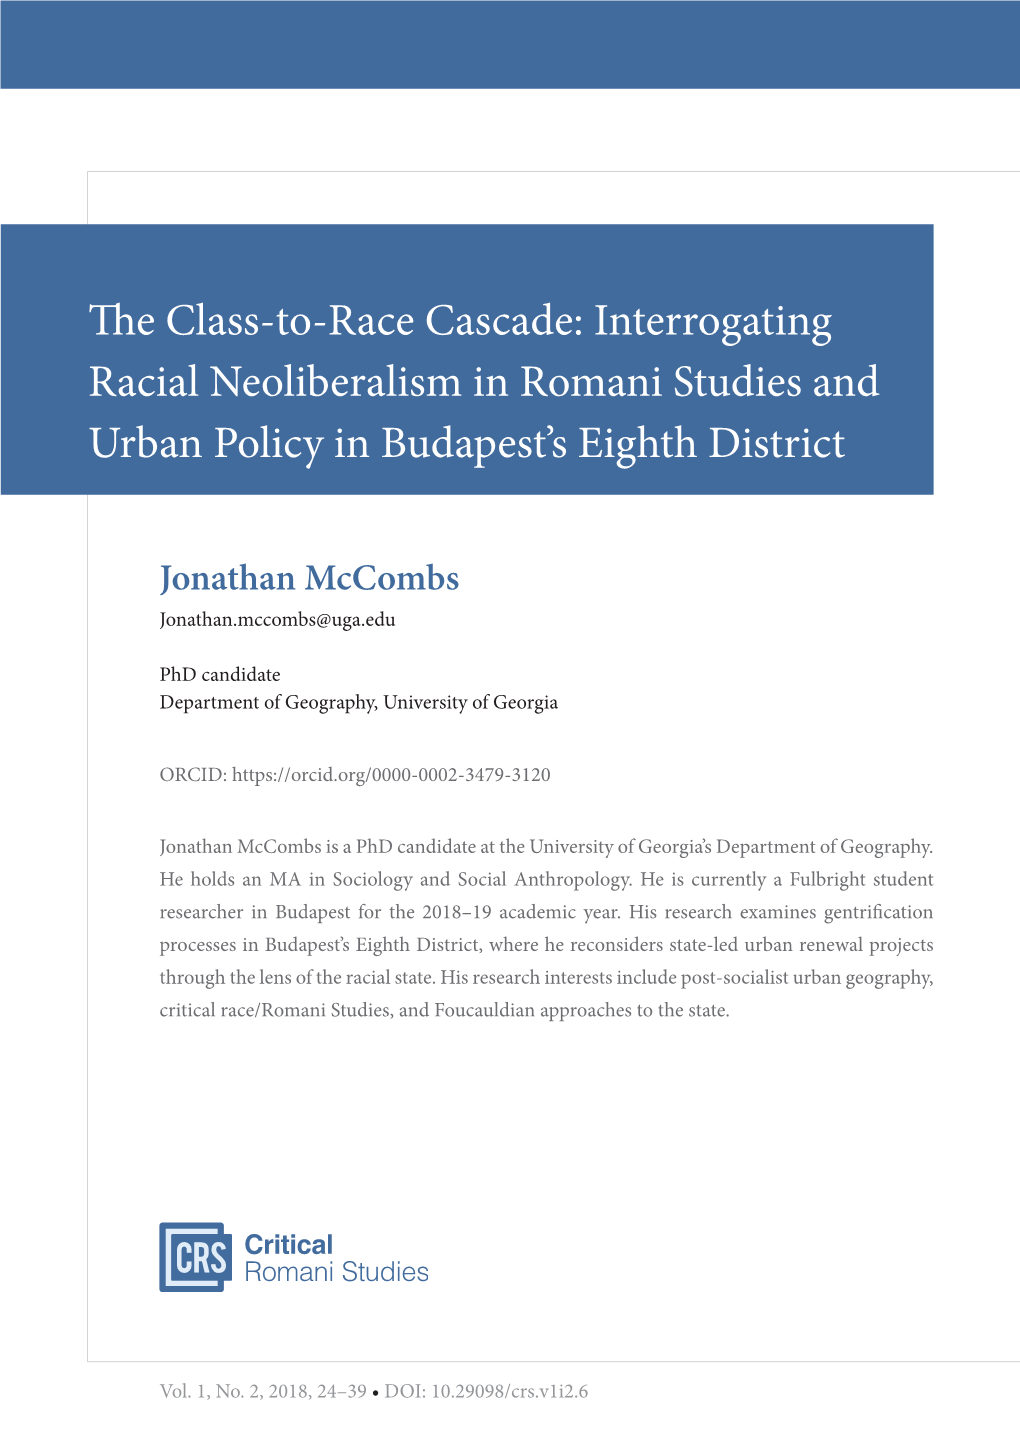 The Class-To-Race Cascade: Interrogating Racial Neoliberalism in Romani Studies and Urban Policy in Budapest’S Eighth District